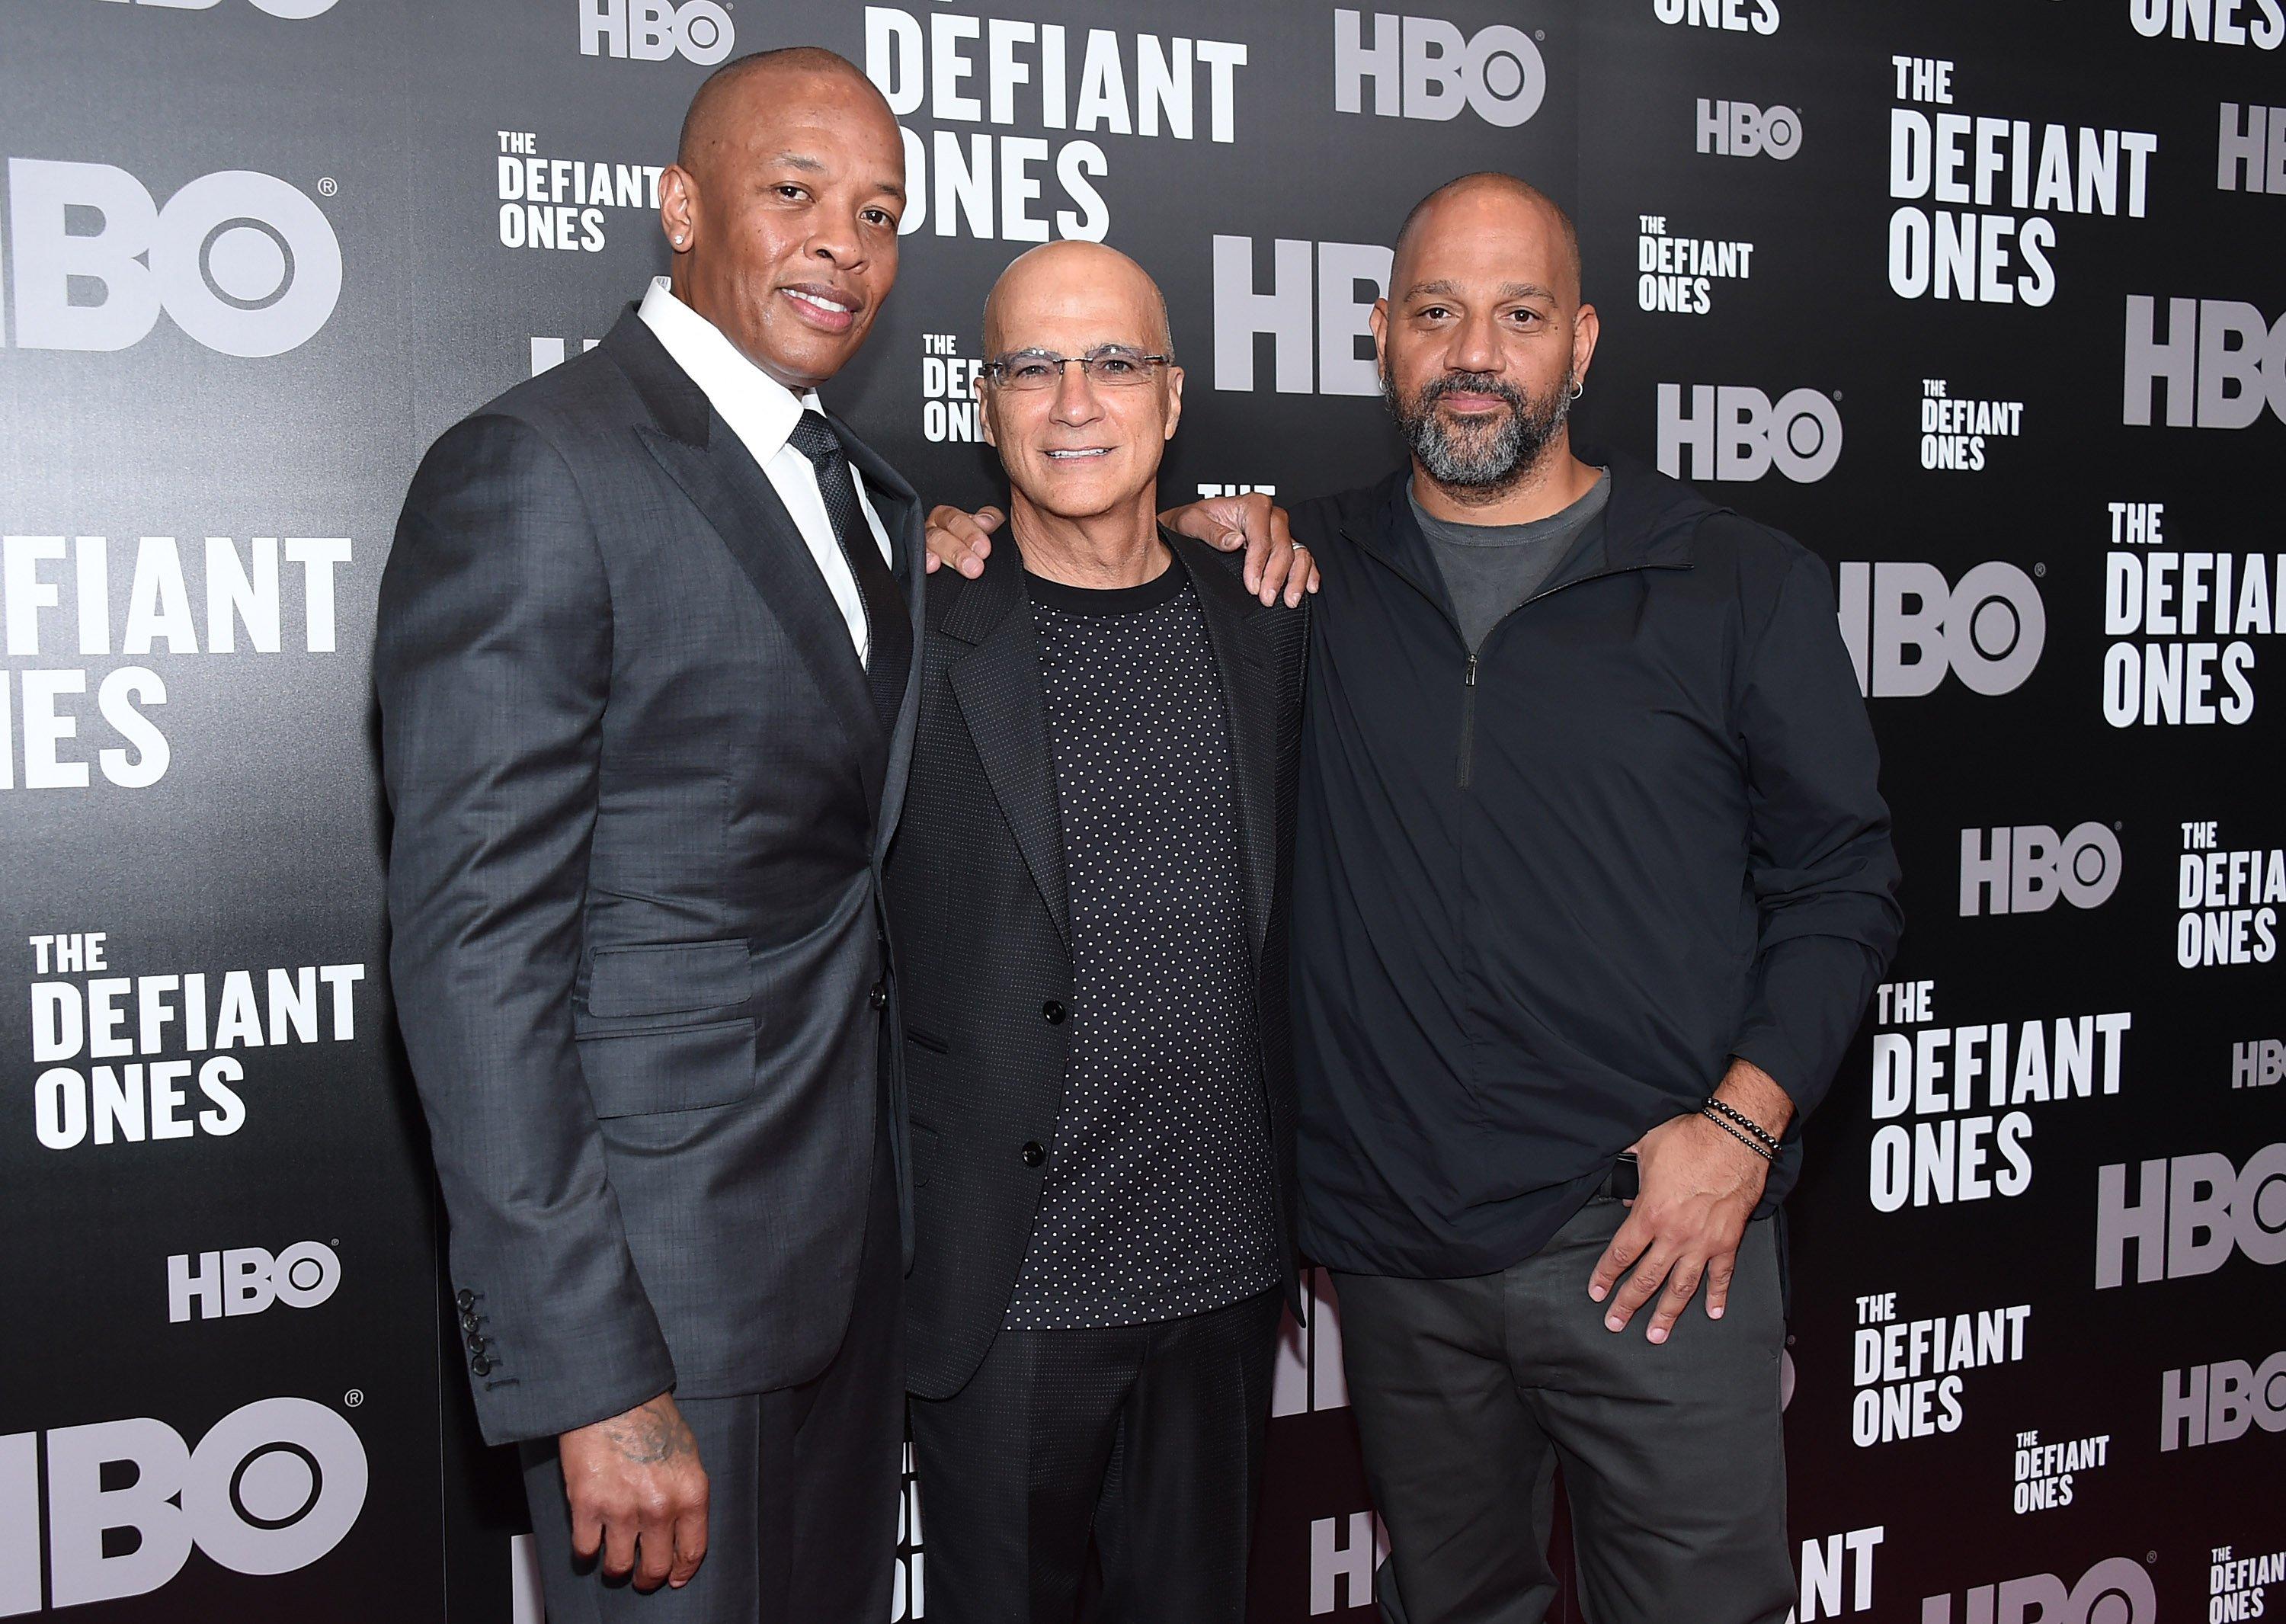 Dr. Dre, Jimmy Iovine and Allen Hughes red carpet